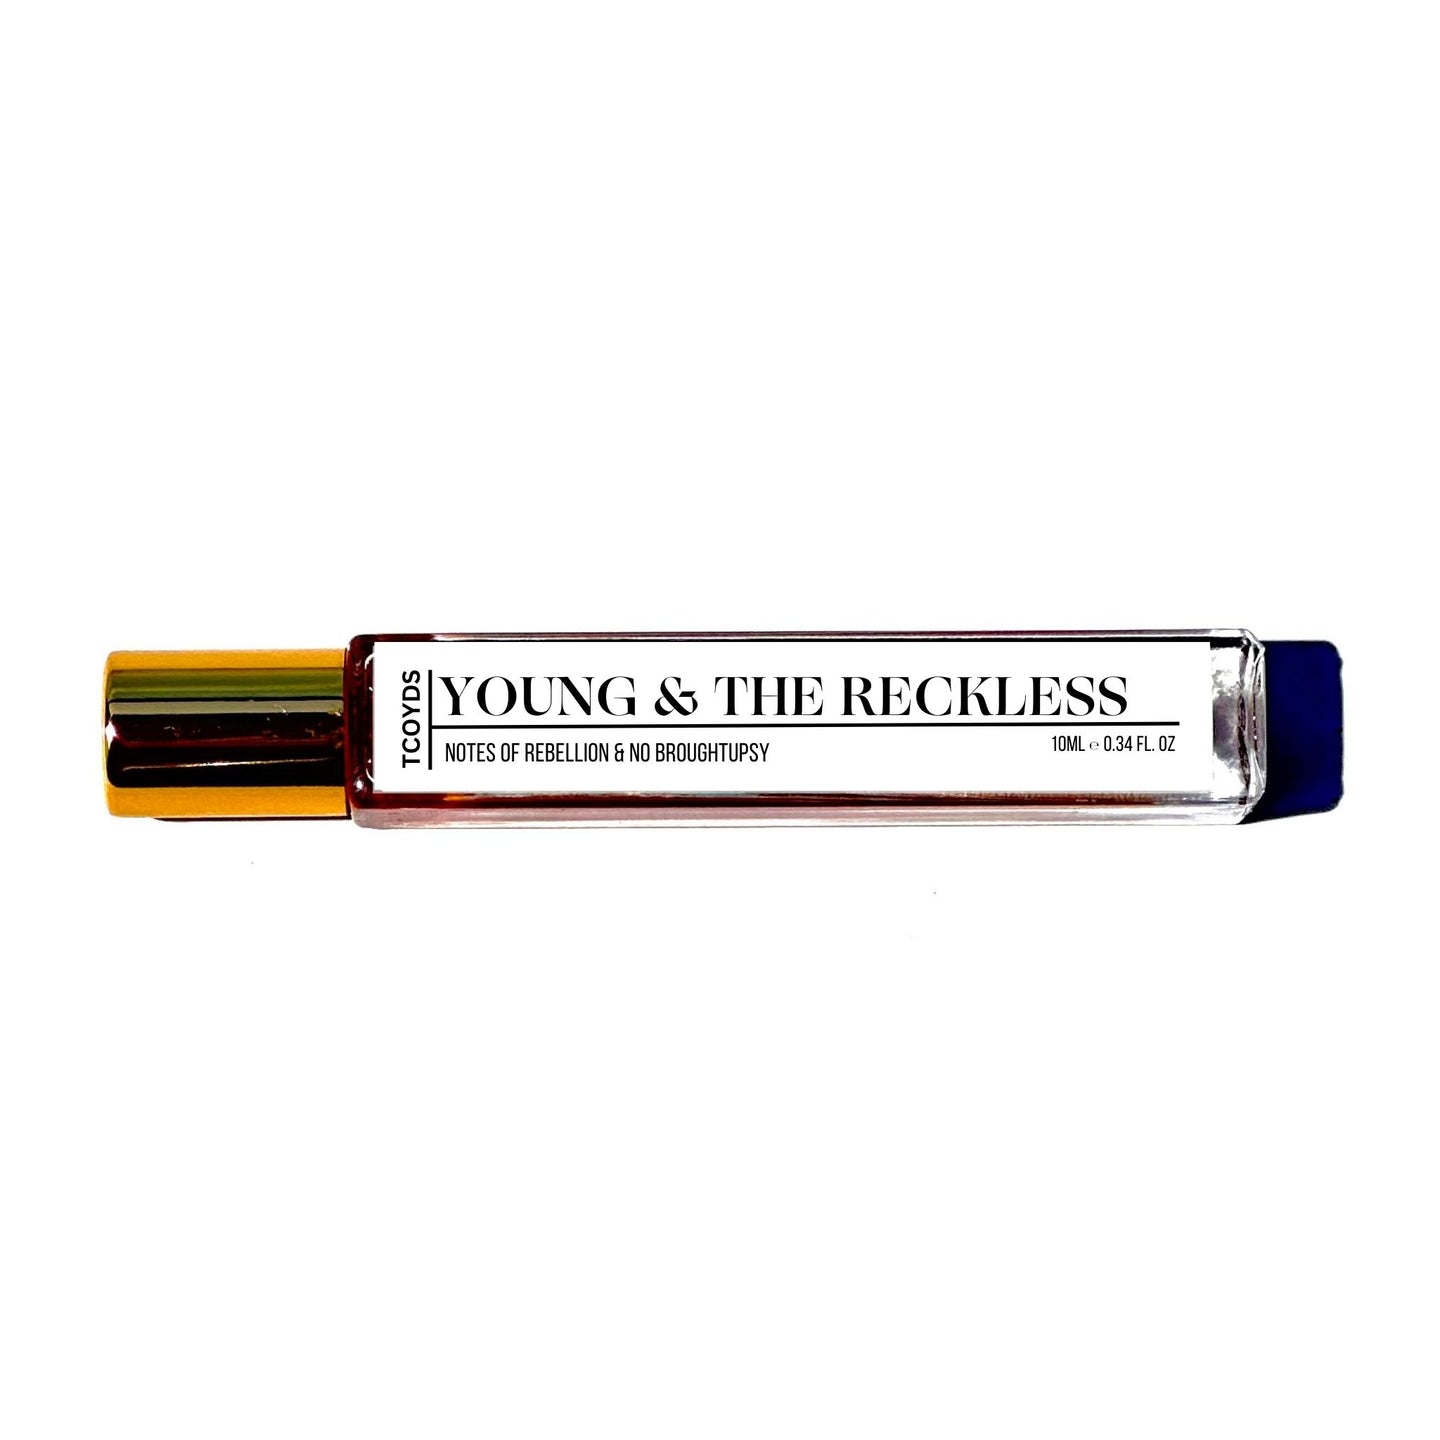 YOUNG & THE RECKLESS Perfume Oil 10ml w/ wand applicator